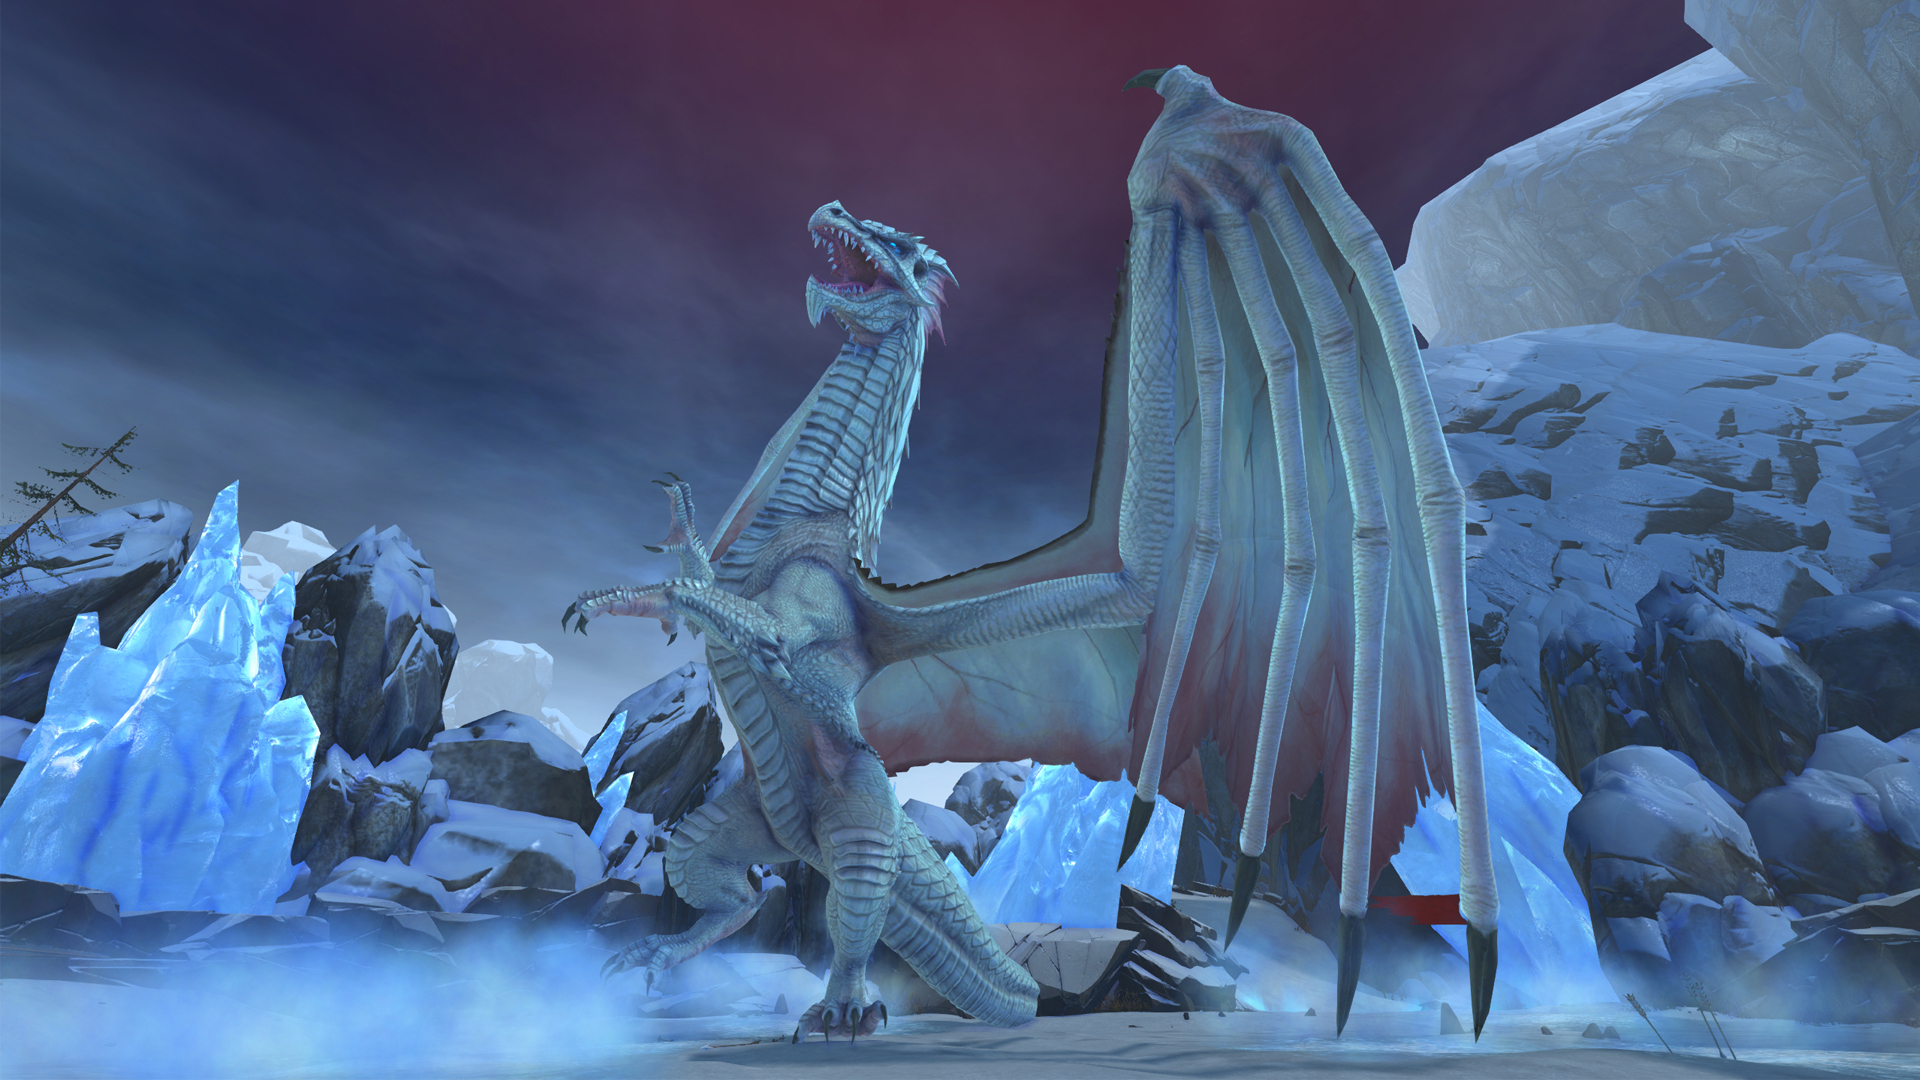 The dragon hunts have begun in Neverwinter: Dragonslayer! - Epic Games Store